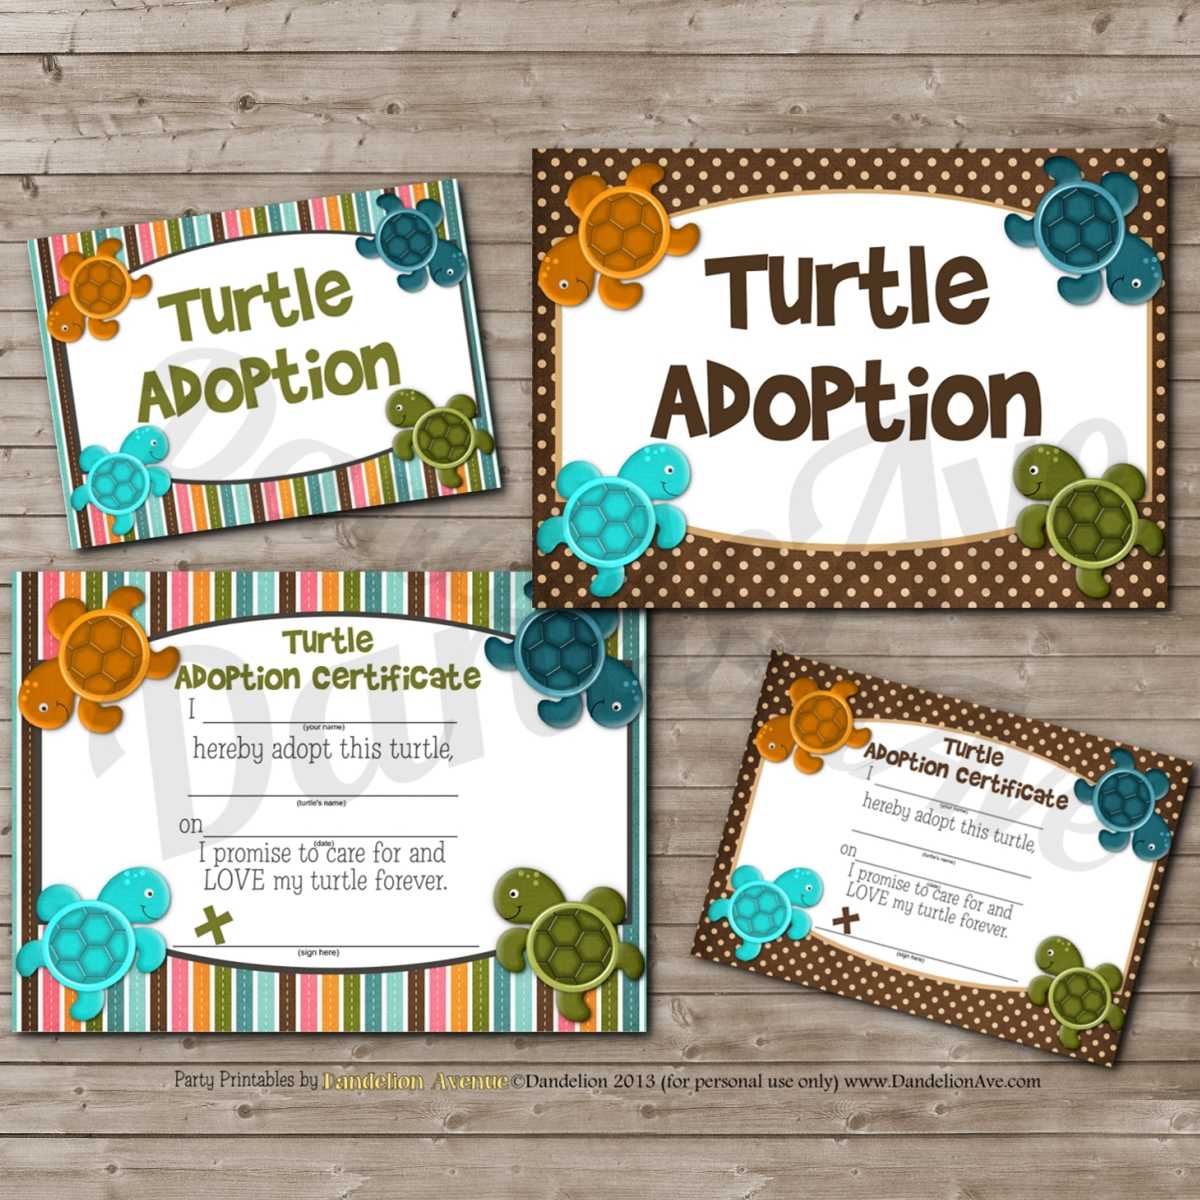 Adopt A Turtle Certificate And Sign Set | Dandelion Avenue With Toy Adoption Certificate Template